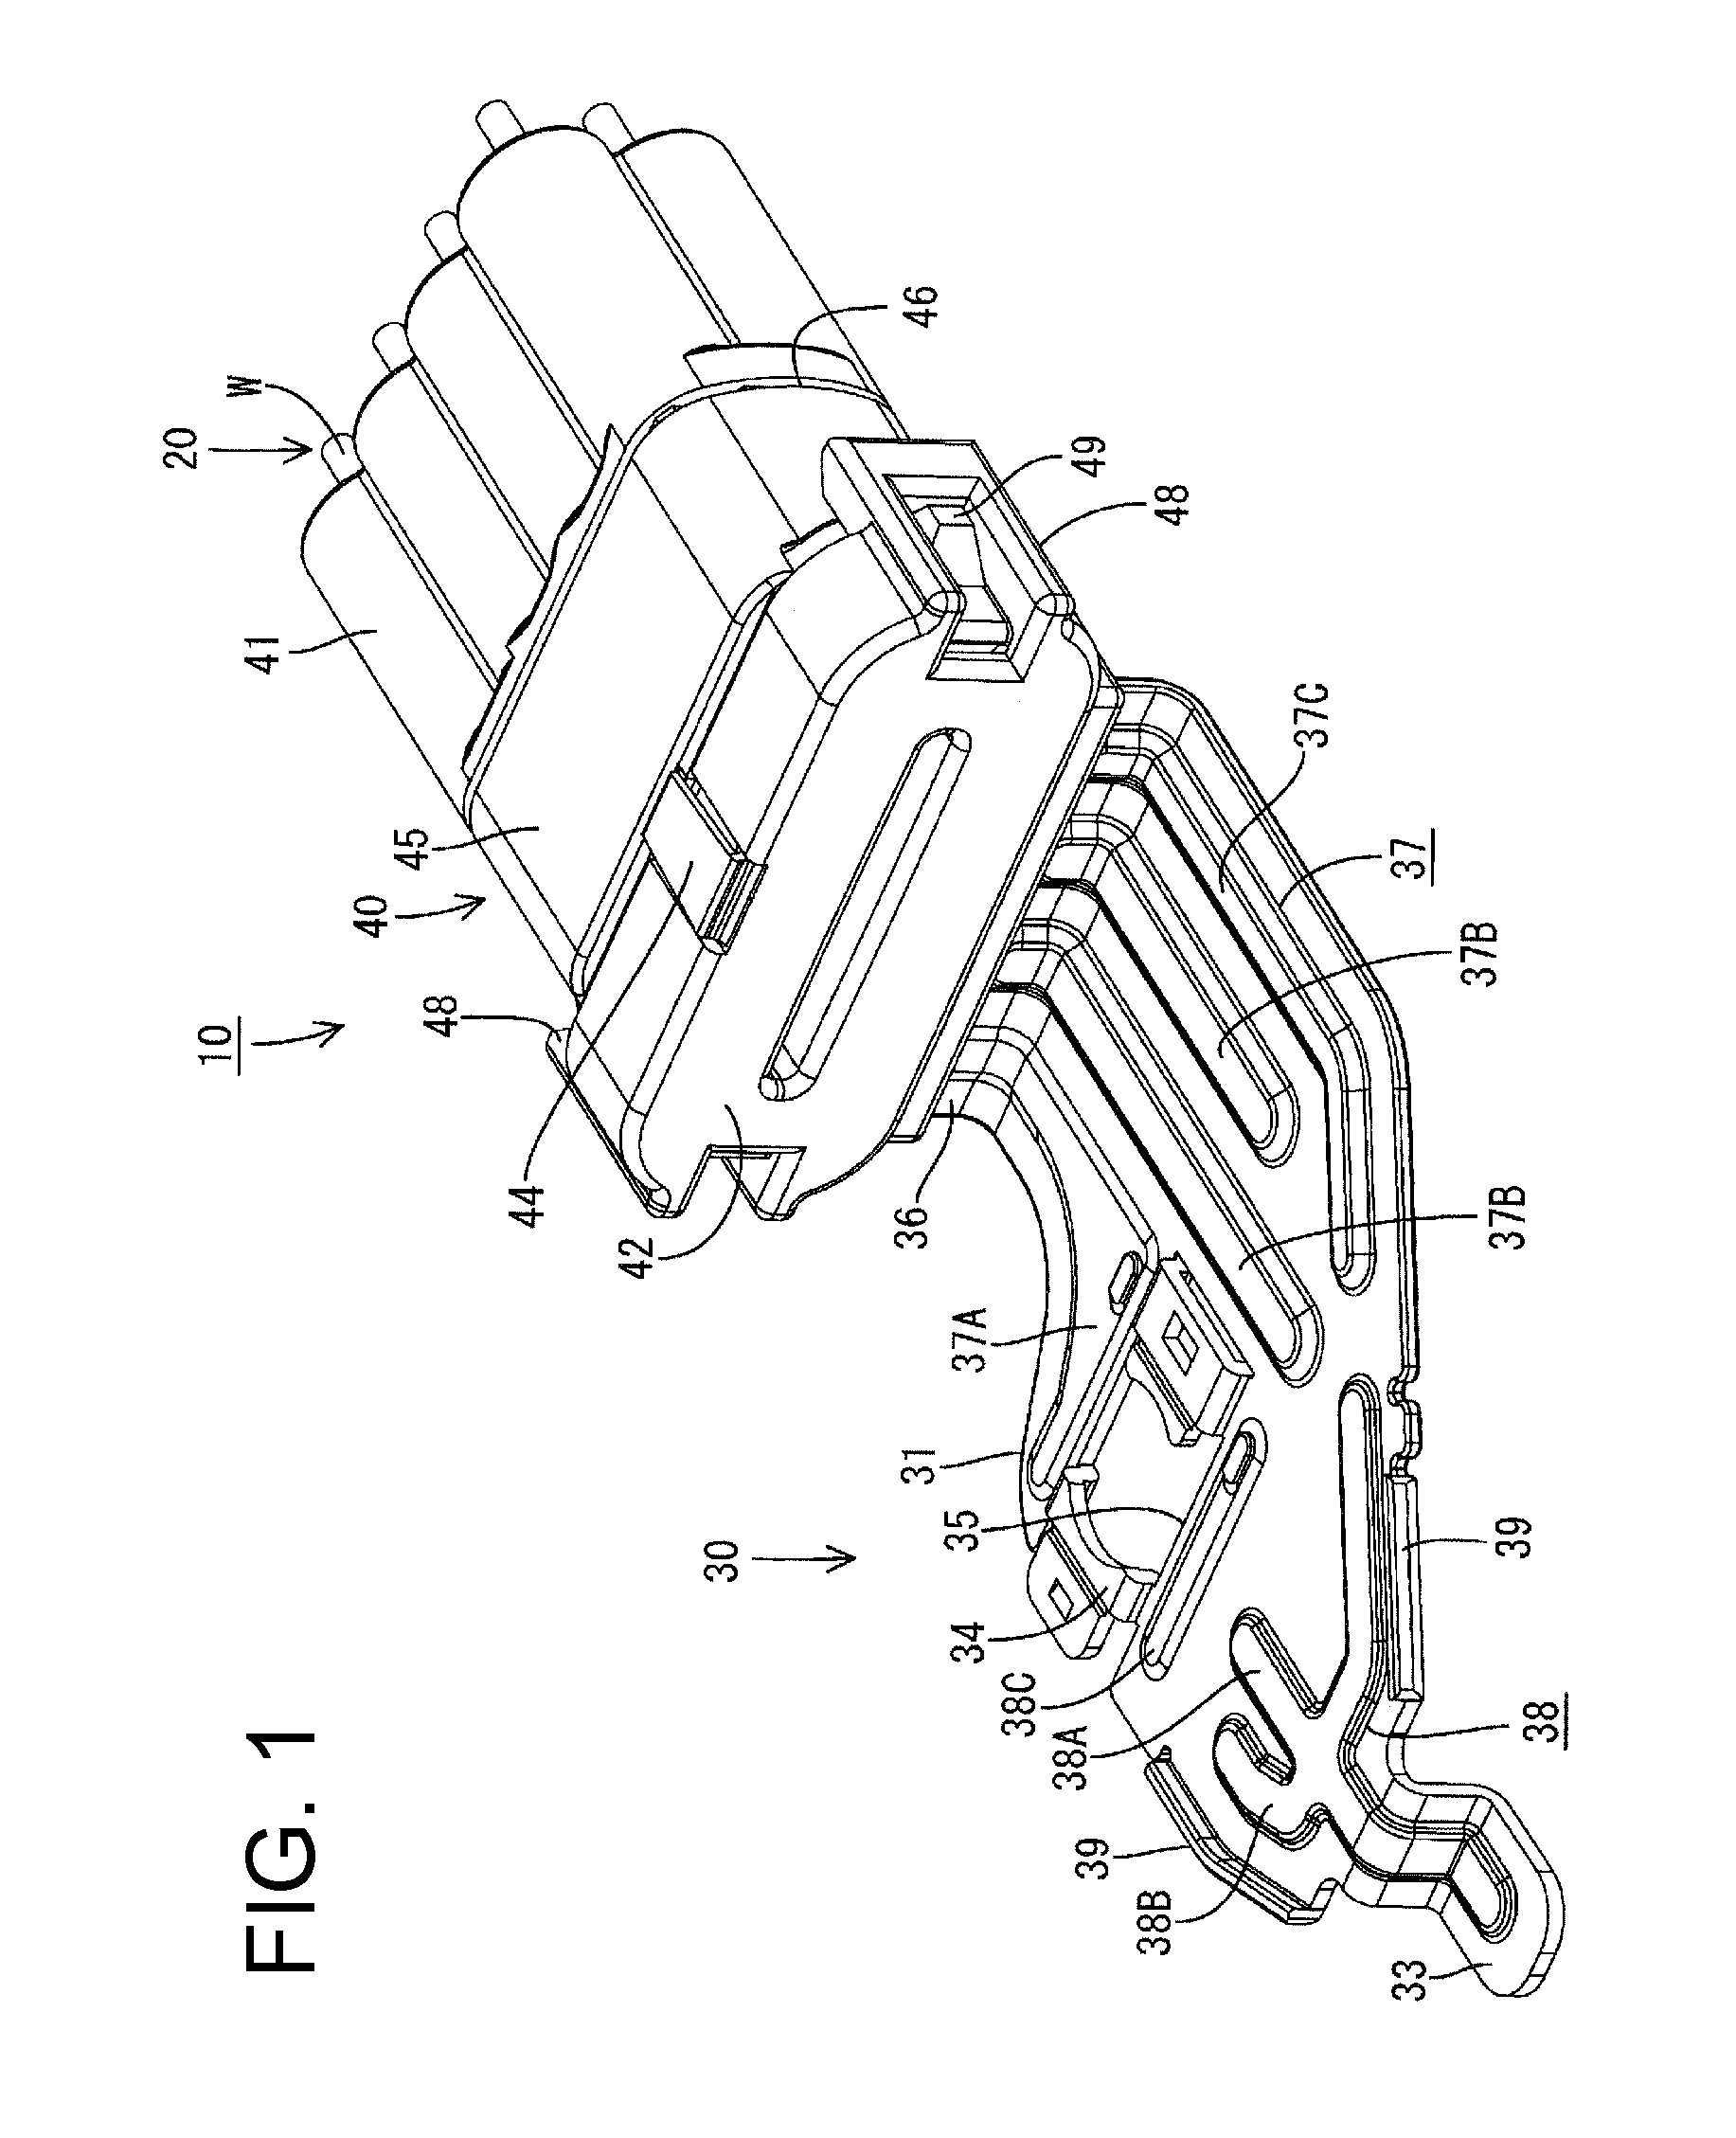 Conductive plate and joint connector